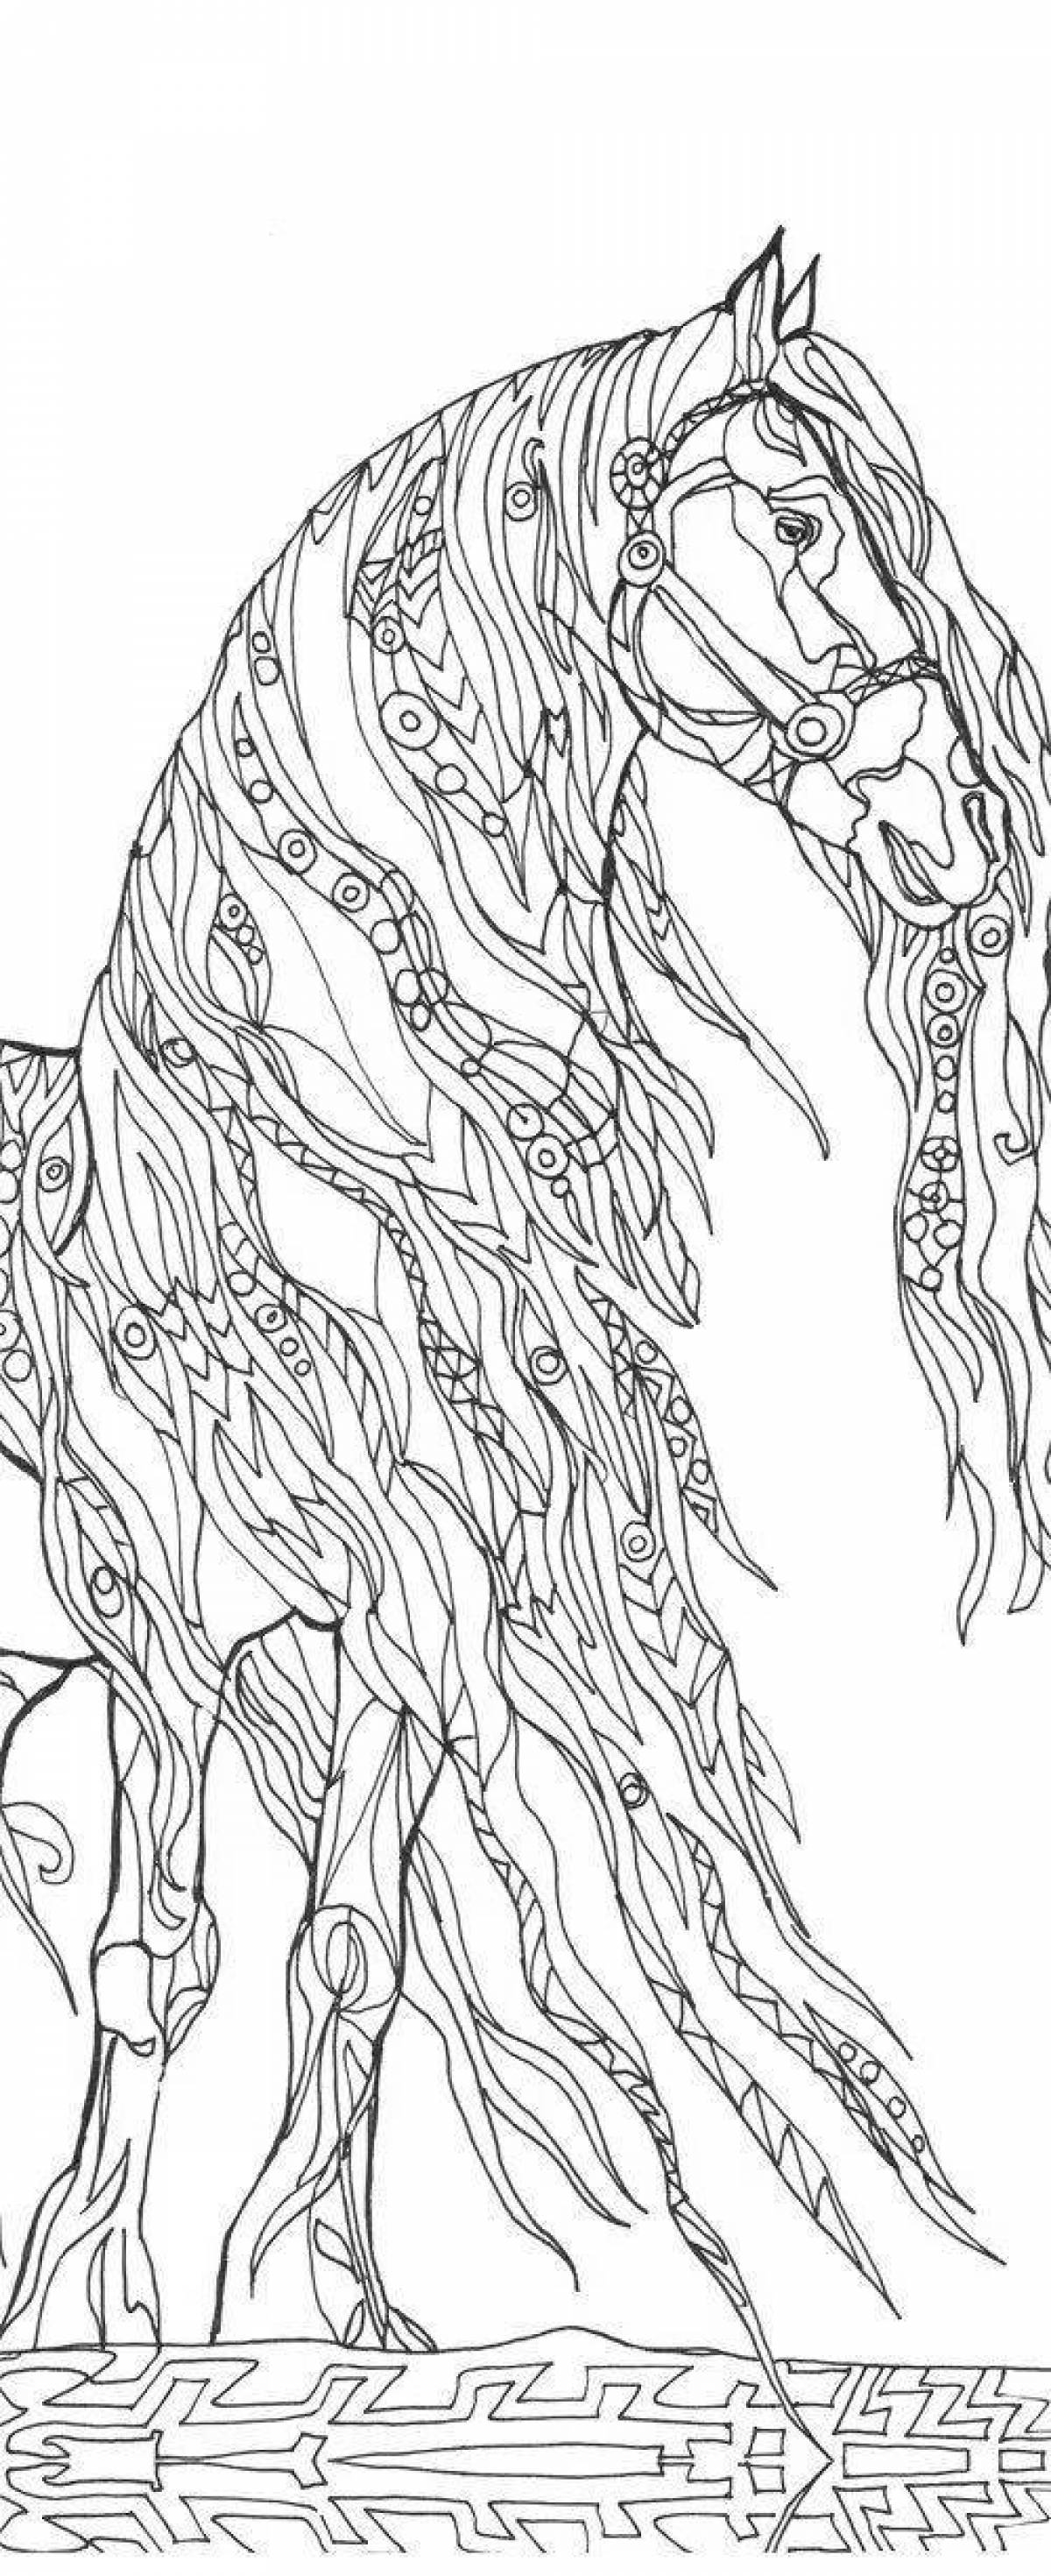 Exalted complex horse coloring page